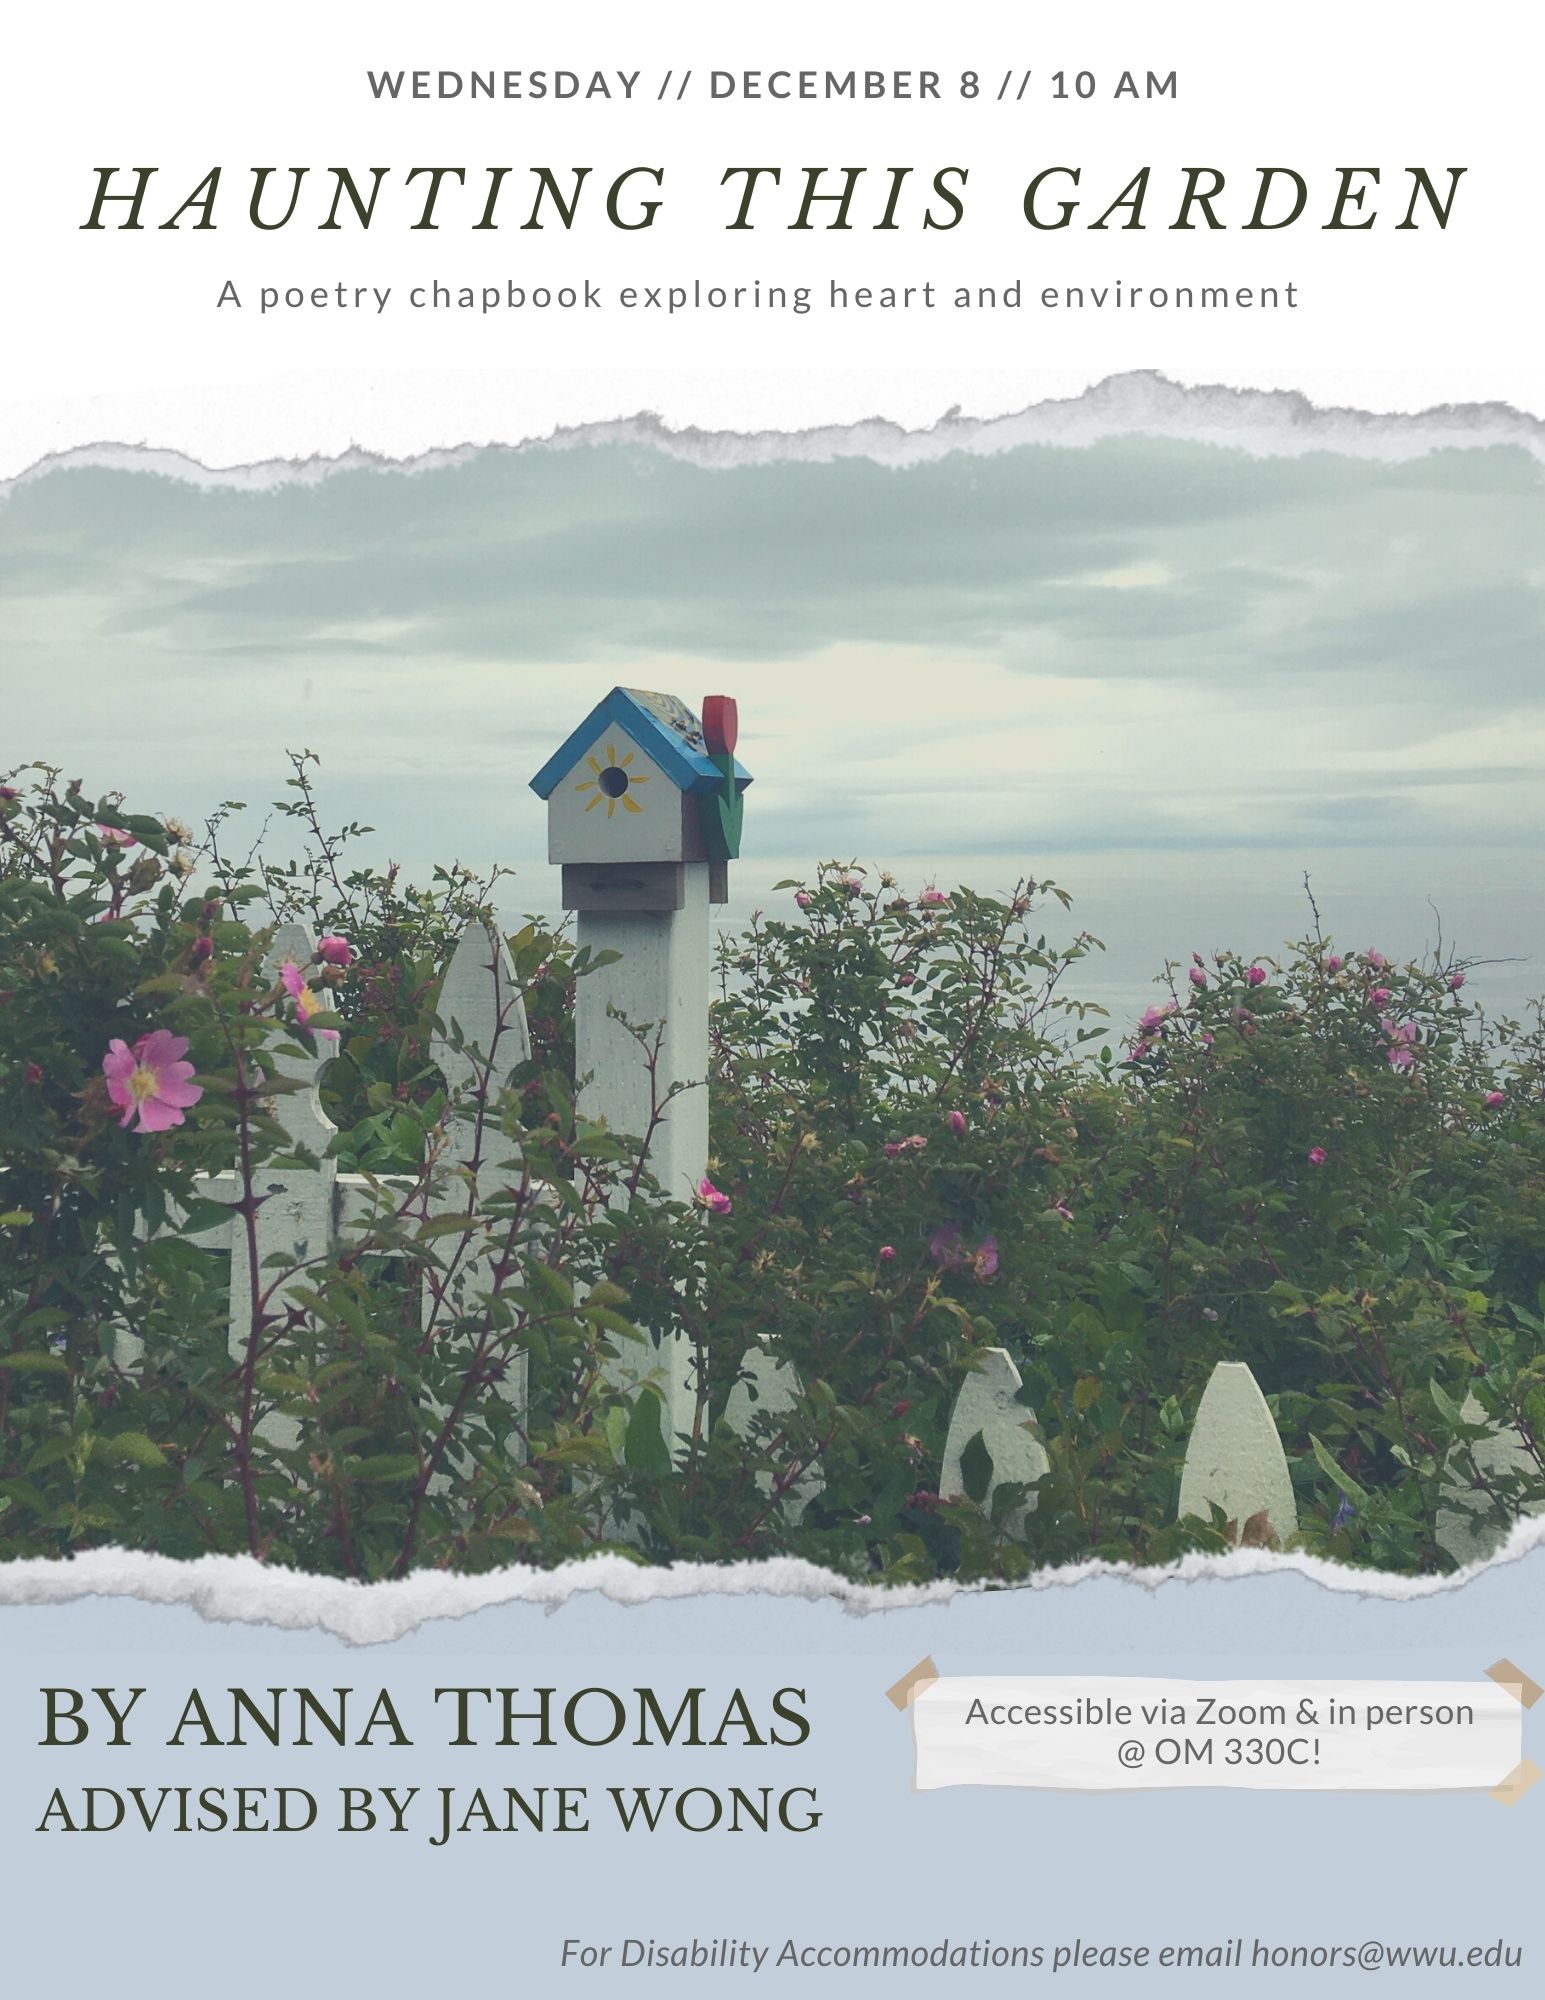 A photo of a blue and white painted birdhouse sitting on a white picket fence overgrown with wild roses. Behind the fence, cloudy skies and the Puget Sound are visible. Above the image reads, "Wednesday, December 8, 10 AM. Haunting This Garden, A poetry chapbook exploring heart and environment." Below the image reads "By Anna Thomas, Advised by Jane Wong. Accessible in person at OM330C & via Zoom! For Disability Accommodations please email honors@wwu.edu."